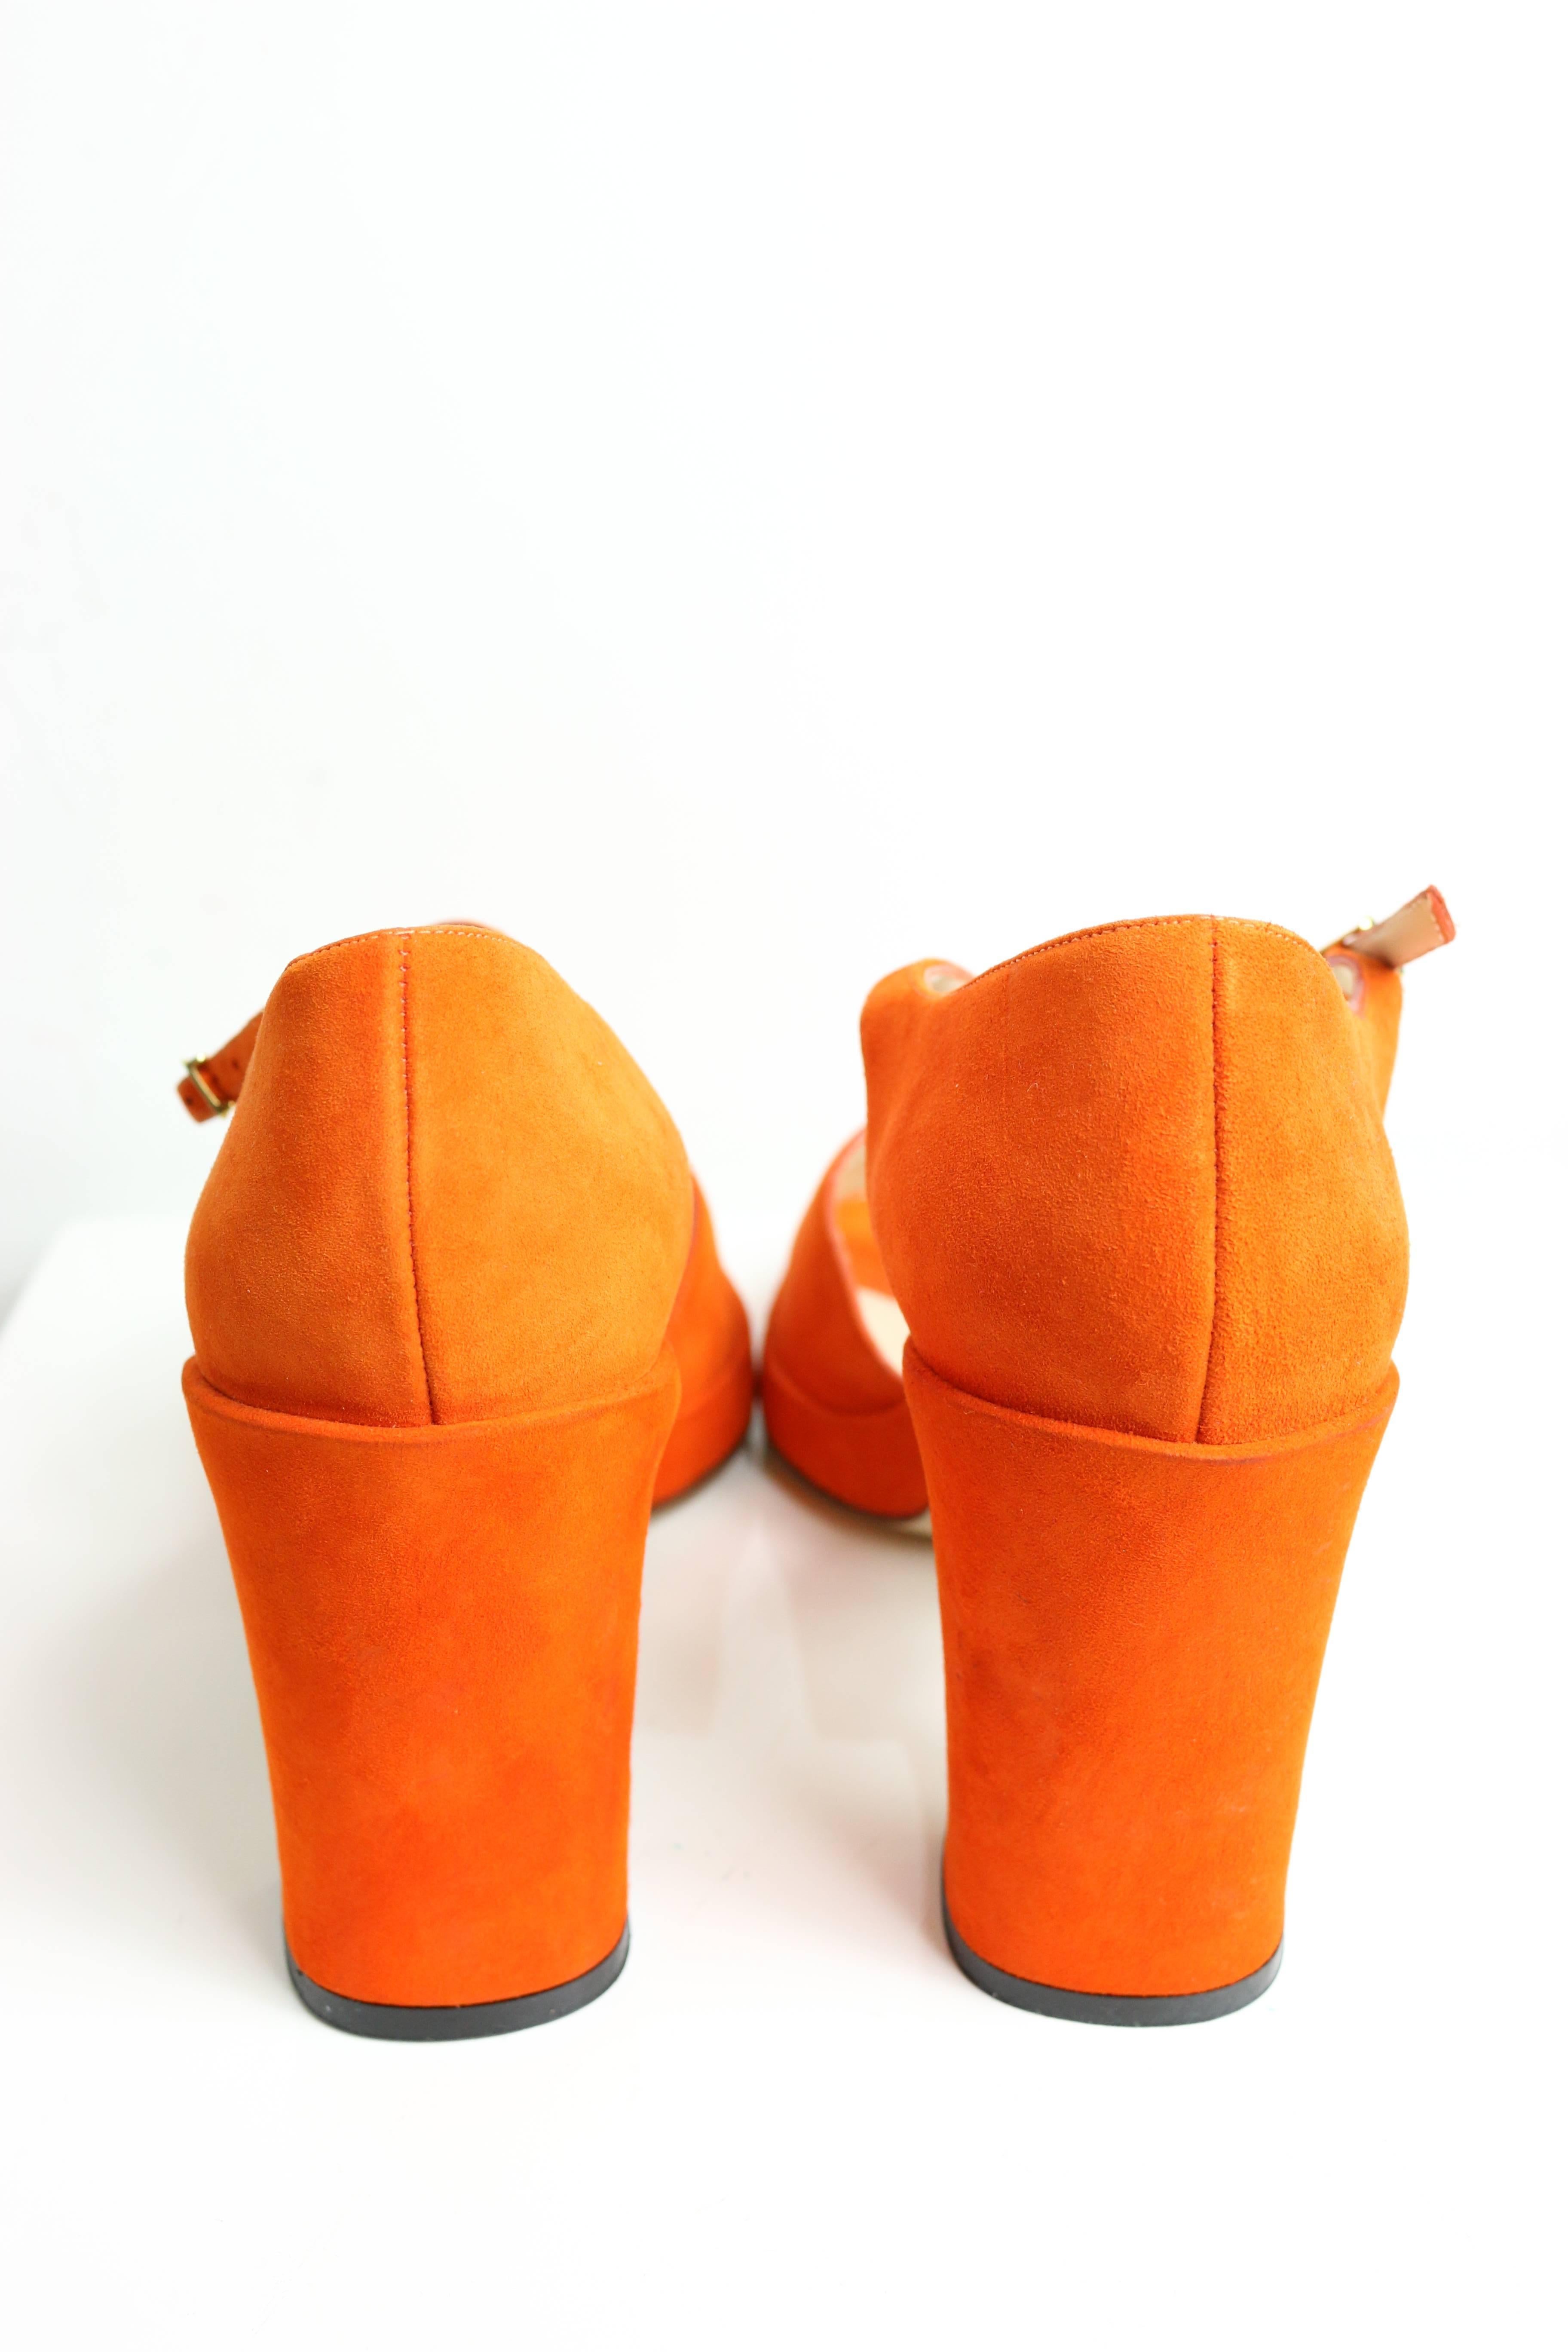 Chanel Orange Embroidered CC Suede Strap Sandals  In Excellent Condition For Sale In Sheung Wan, HK